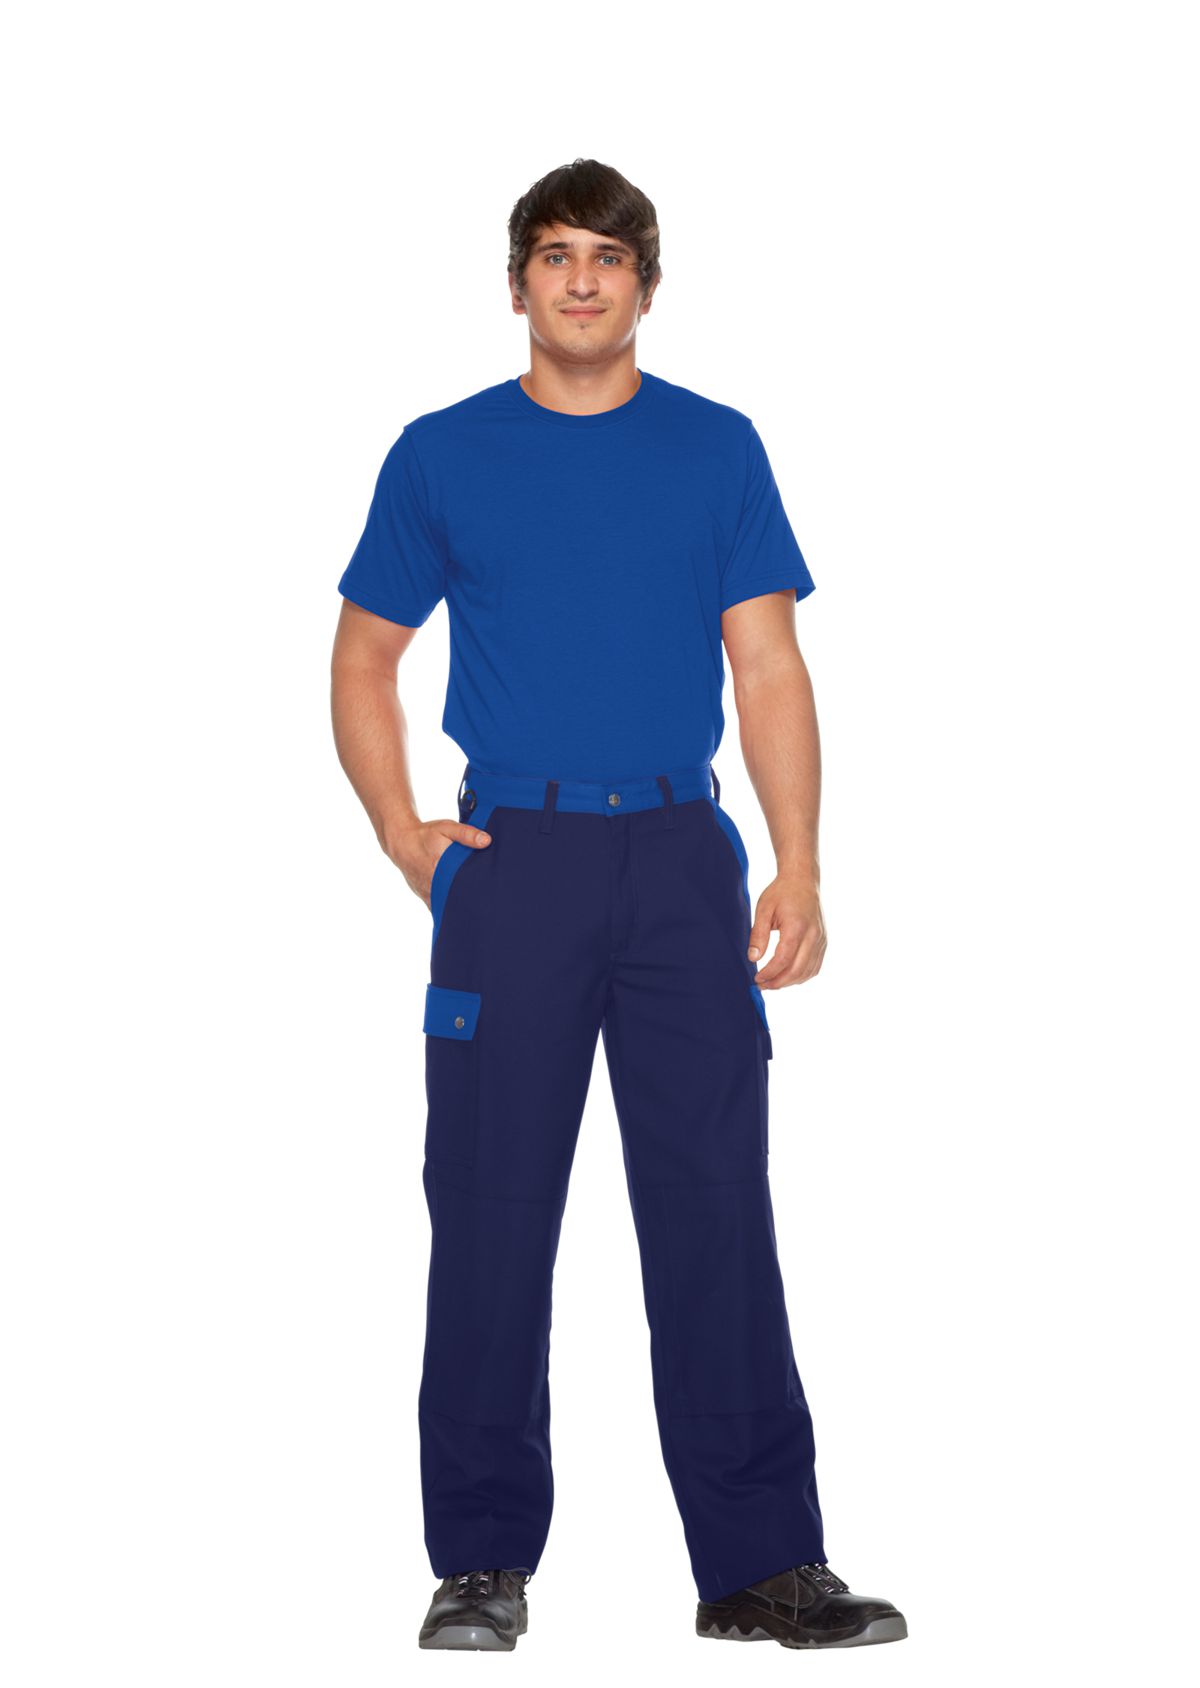 BP® Comfort cargo trousers with knee pad pockets